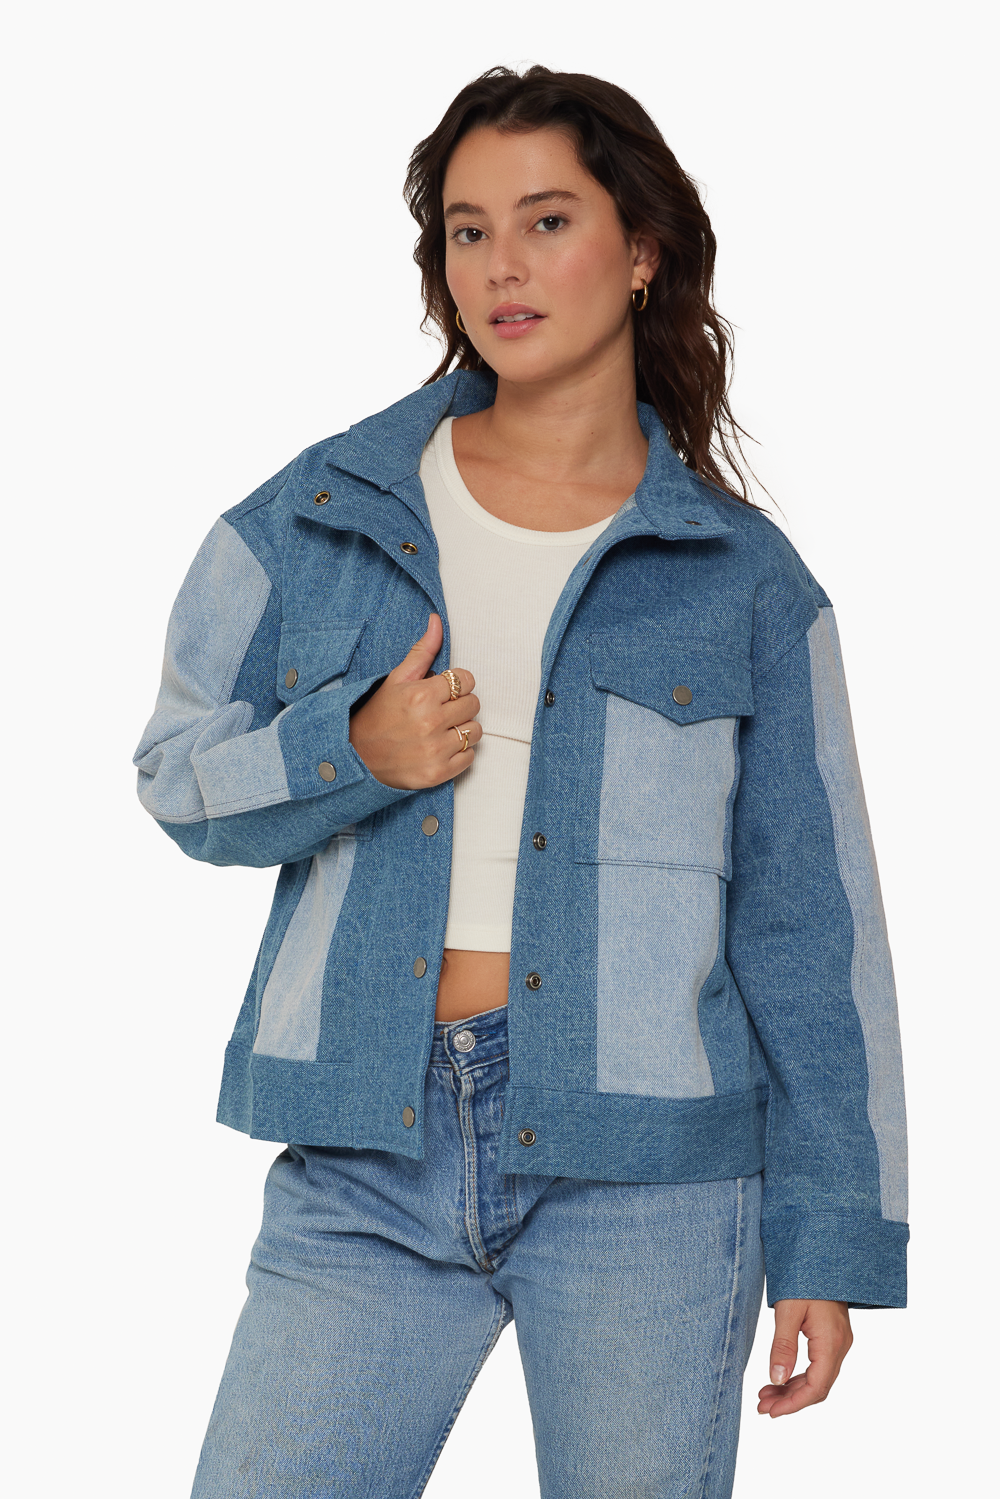 DENIM TWO TONED DENIM JACKET - CLASSIC MID WASH Featured Image